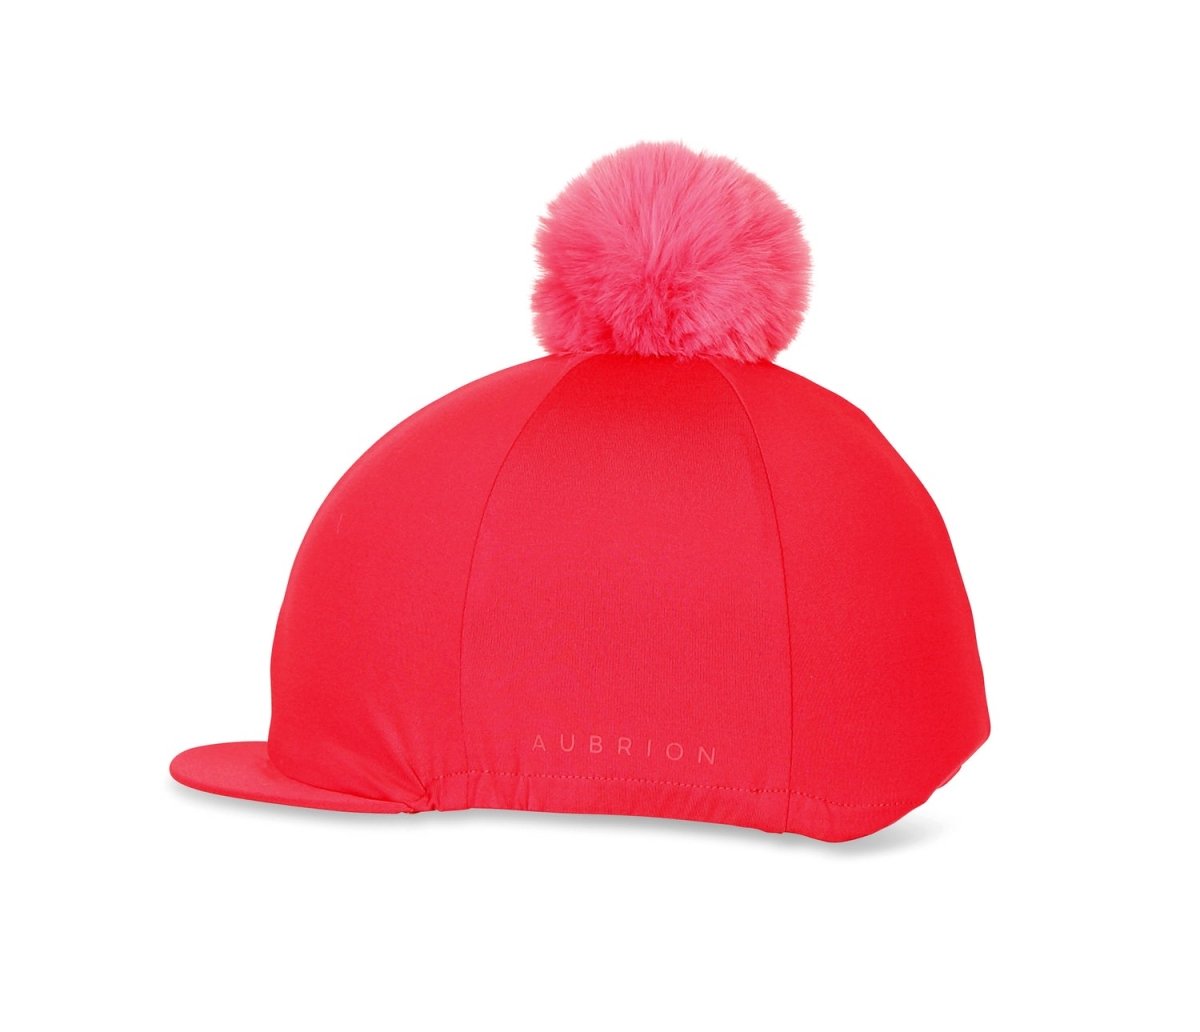 Aubrion SS24 Pom Pom Hat Cover - Coral - One Size